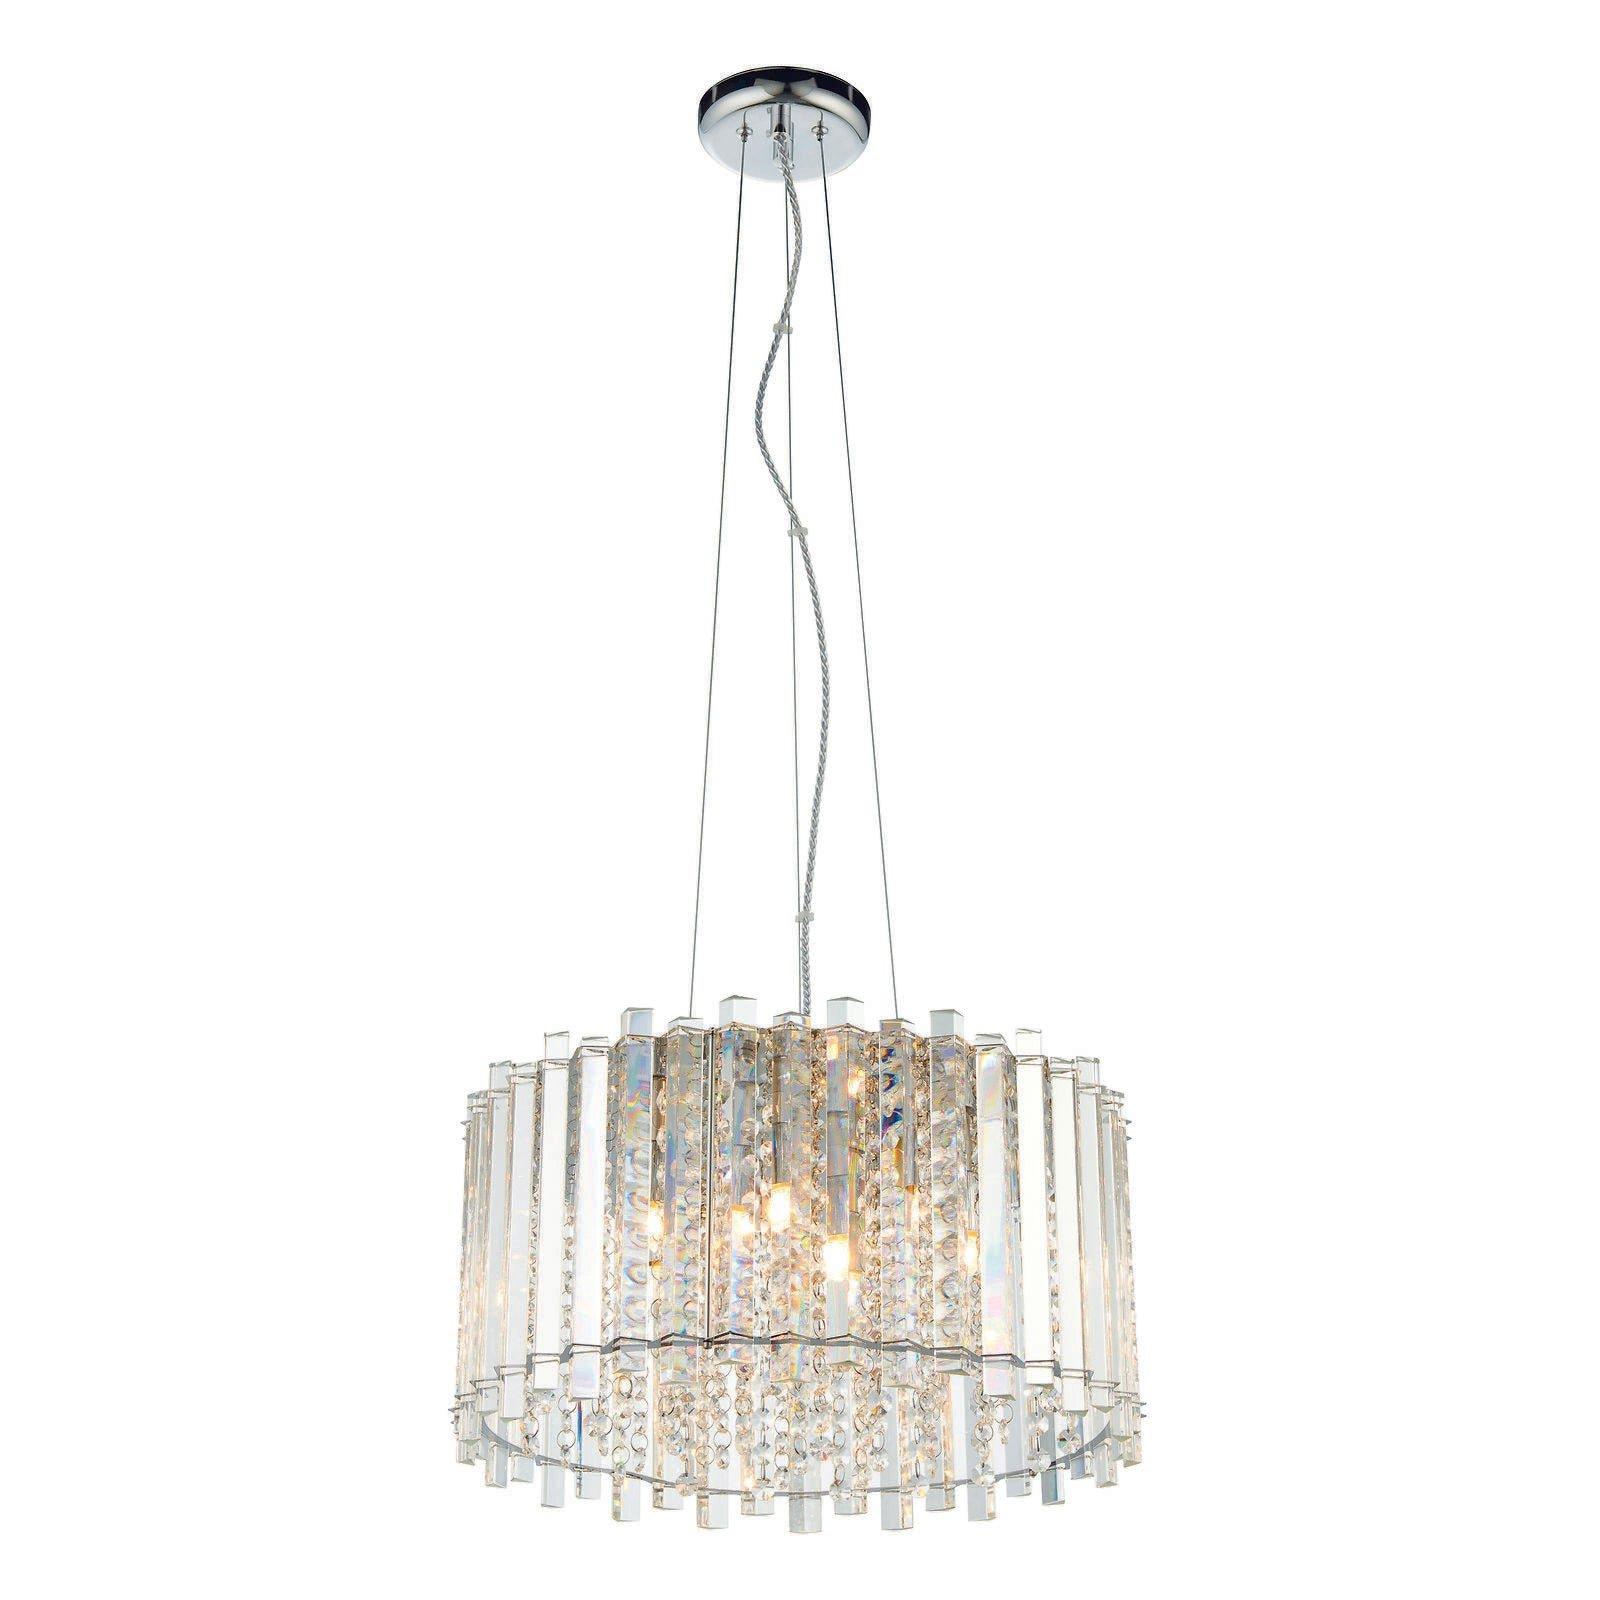 Ceiling Pendant Light Clear Crystal & Chrome Plate 5 x 28W G9 Dimmable